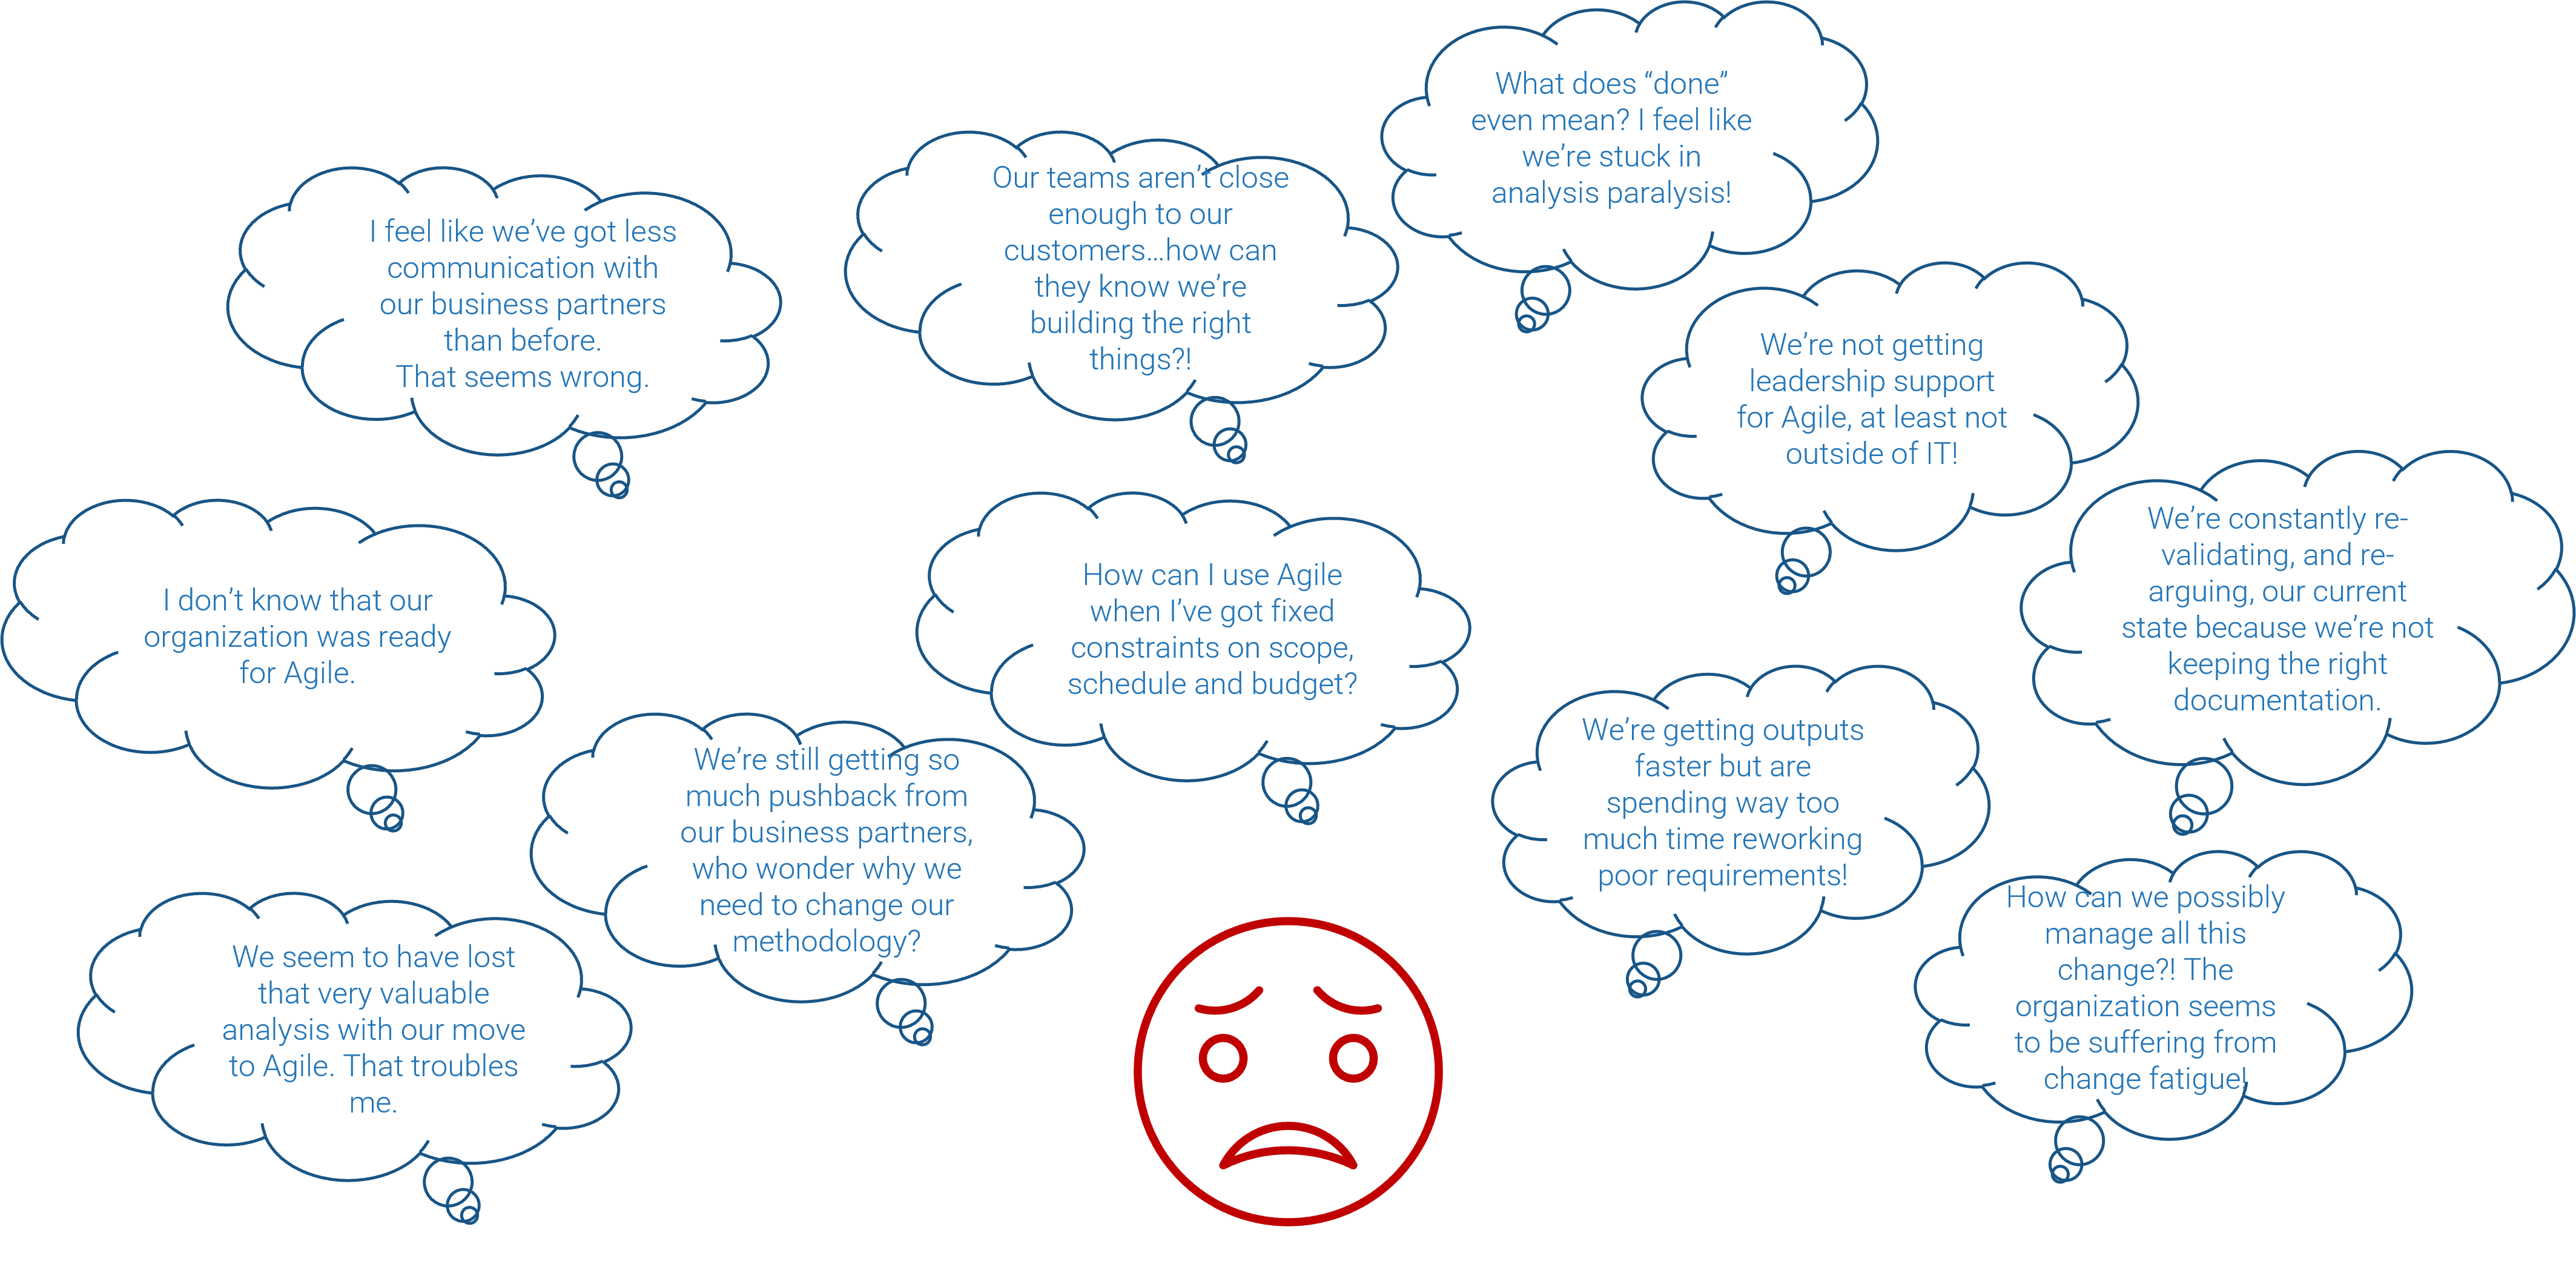 This is an image of a series of thought bubbles, each containing a unique challenge resulting from implementing Agile.